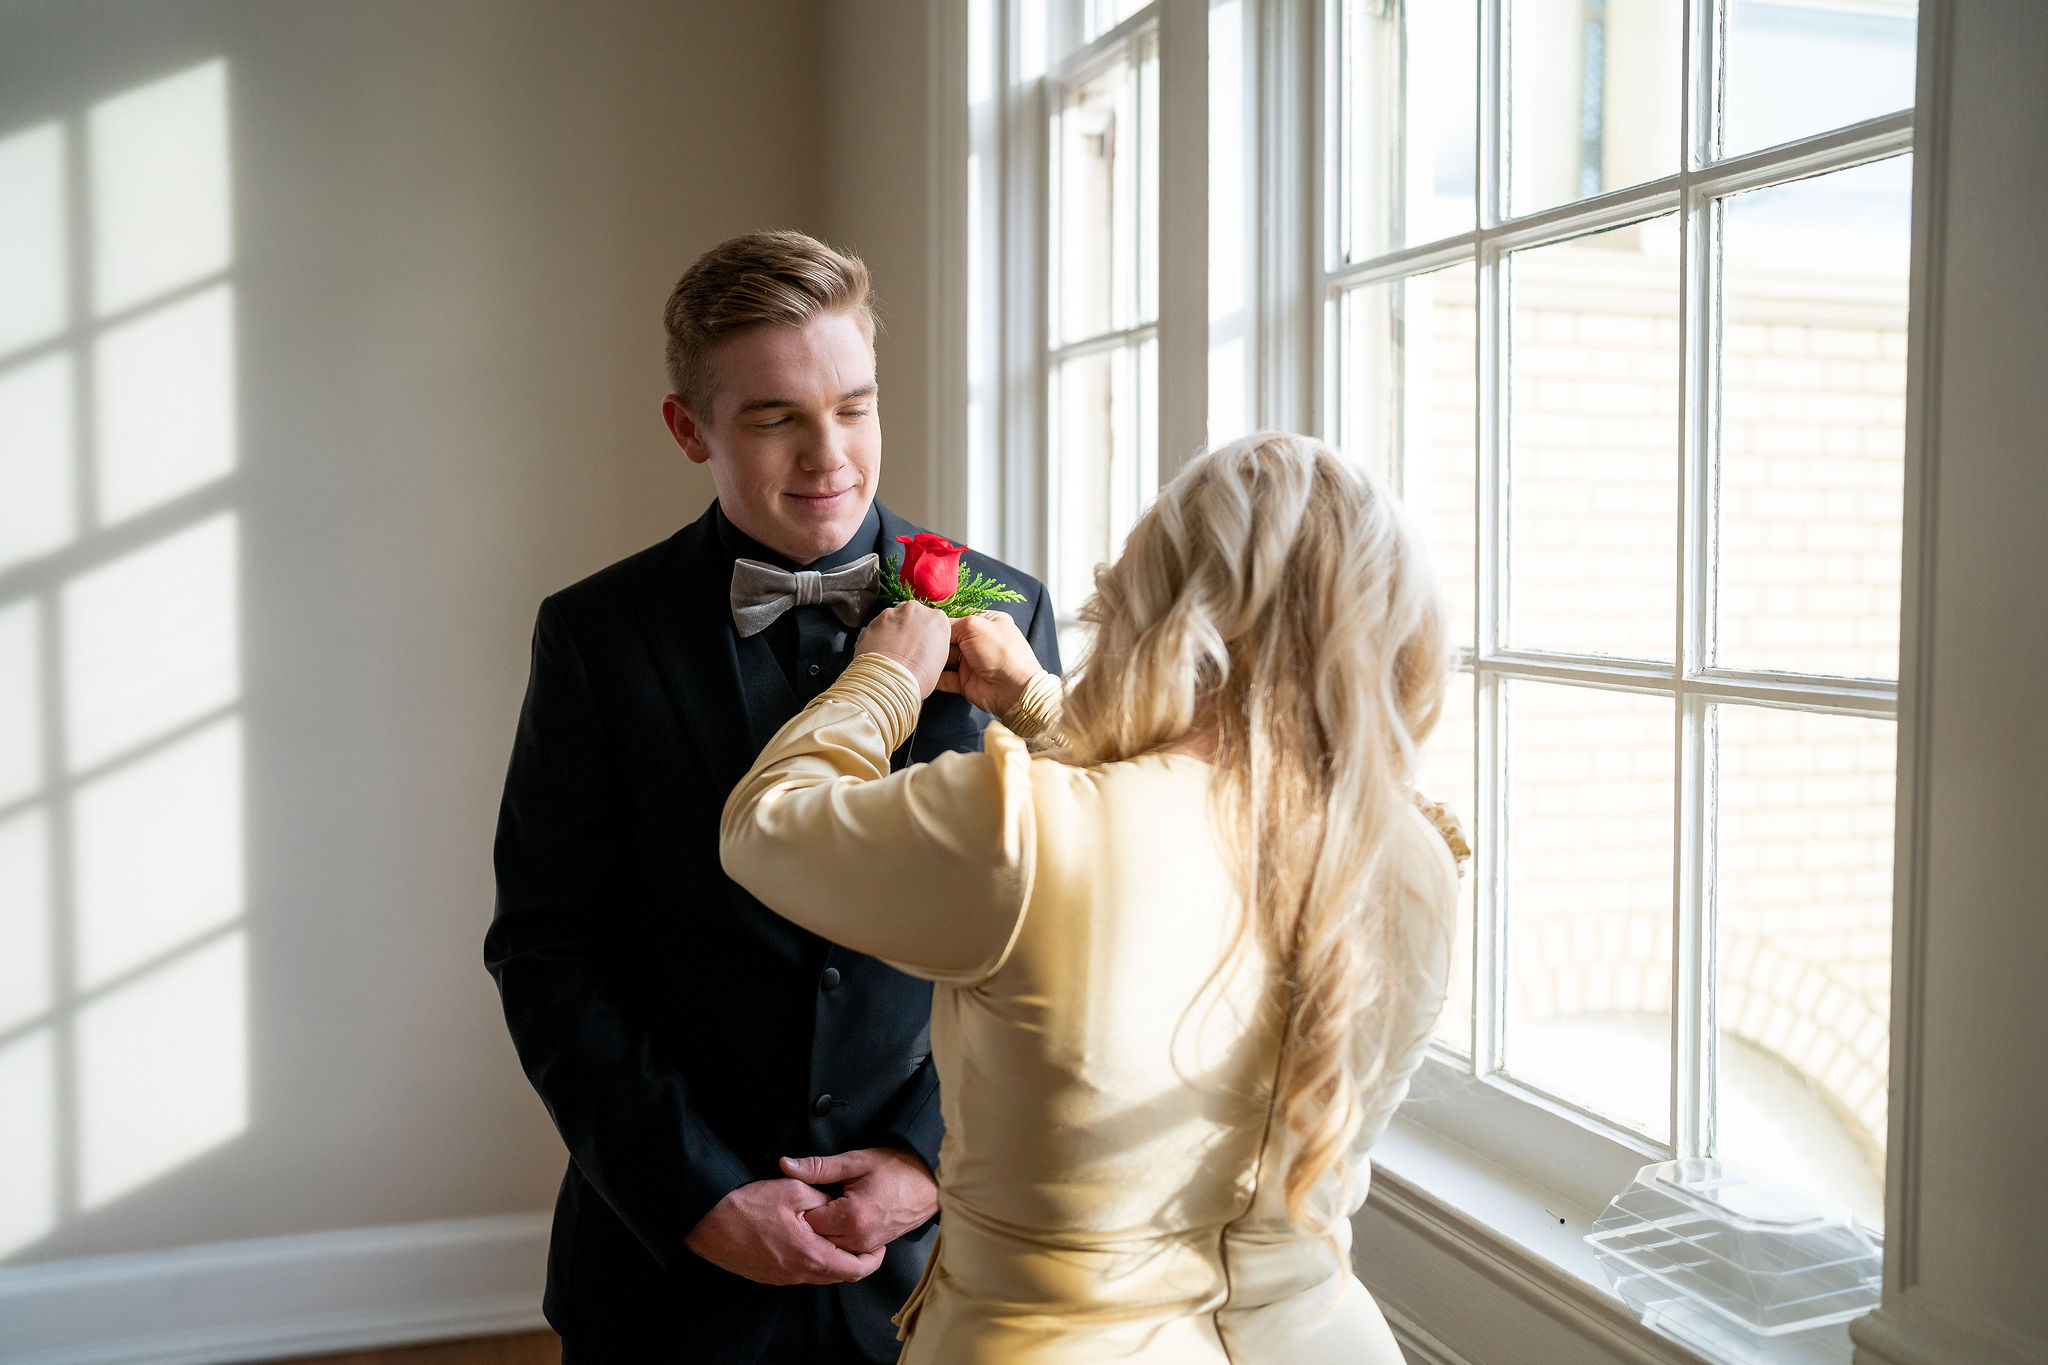 mother of the groom pinning a rose to her son